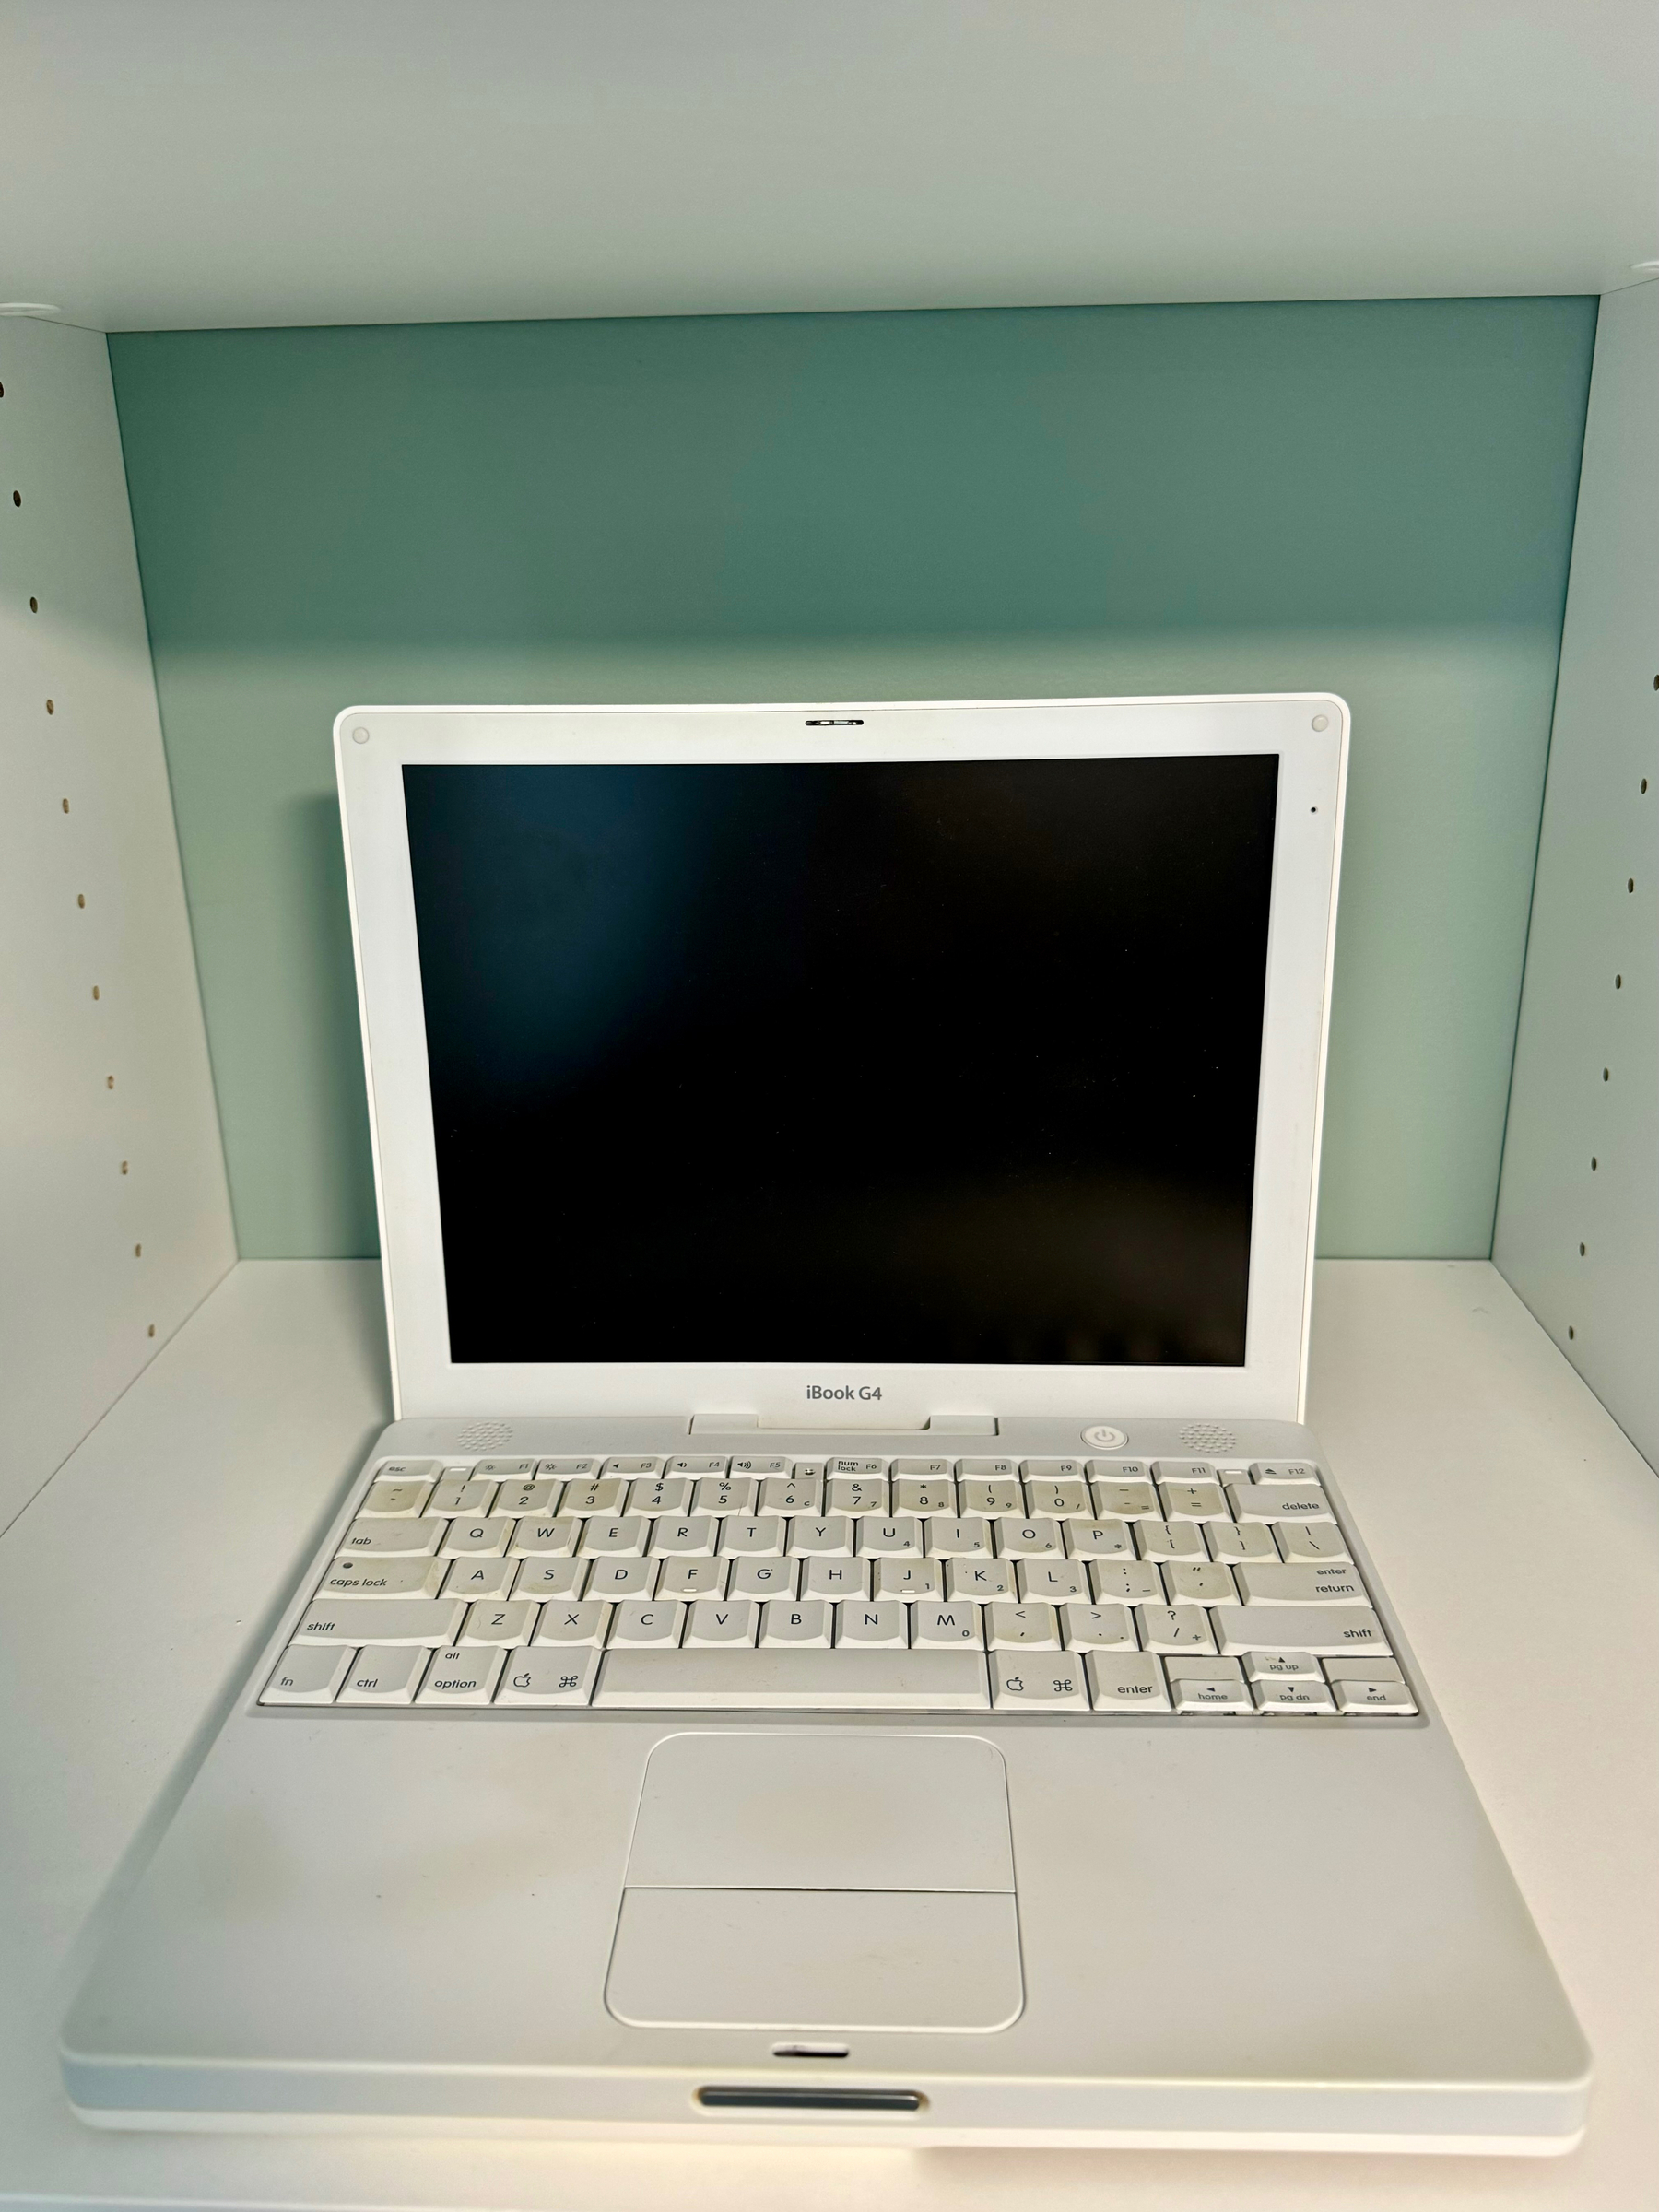 A white iBook G4 laptop, situated on a shelf.